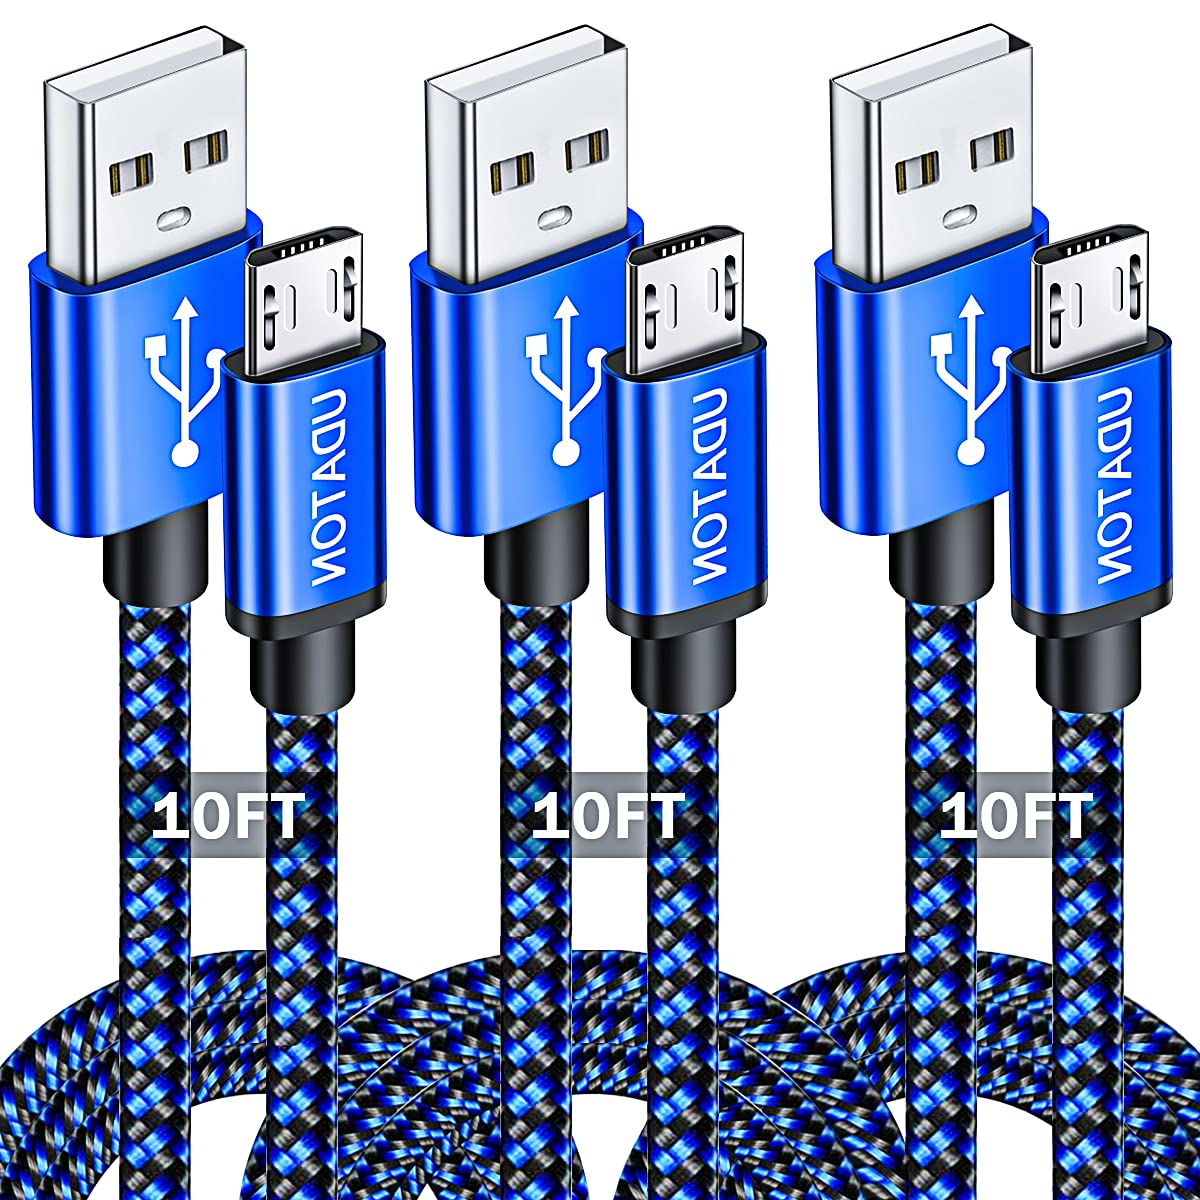 Book Cover Micro USB Cable 10ft, Android Charger, USB C Cable, 3Pack Extra Long Kindle Fire Charger, udaton High Speed Nylon Braided Micro Fast Charging Cord for Samsung Galaxy S7 Kindle Fire 7 PS4 Xbox LG, Blue